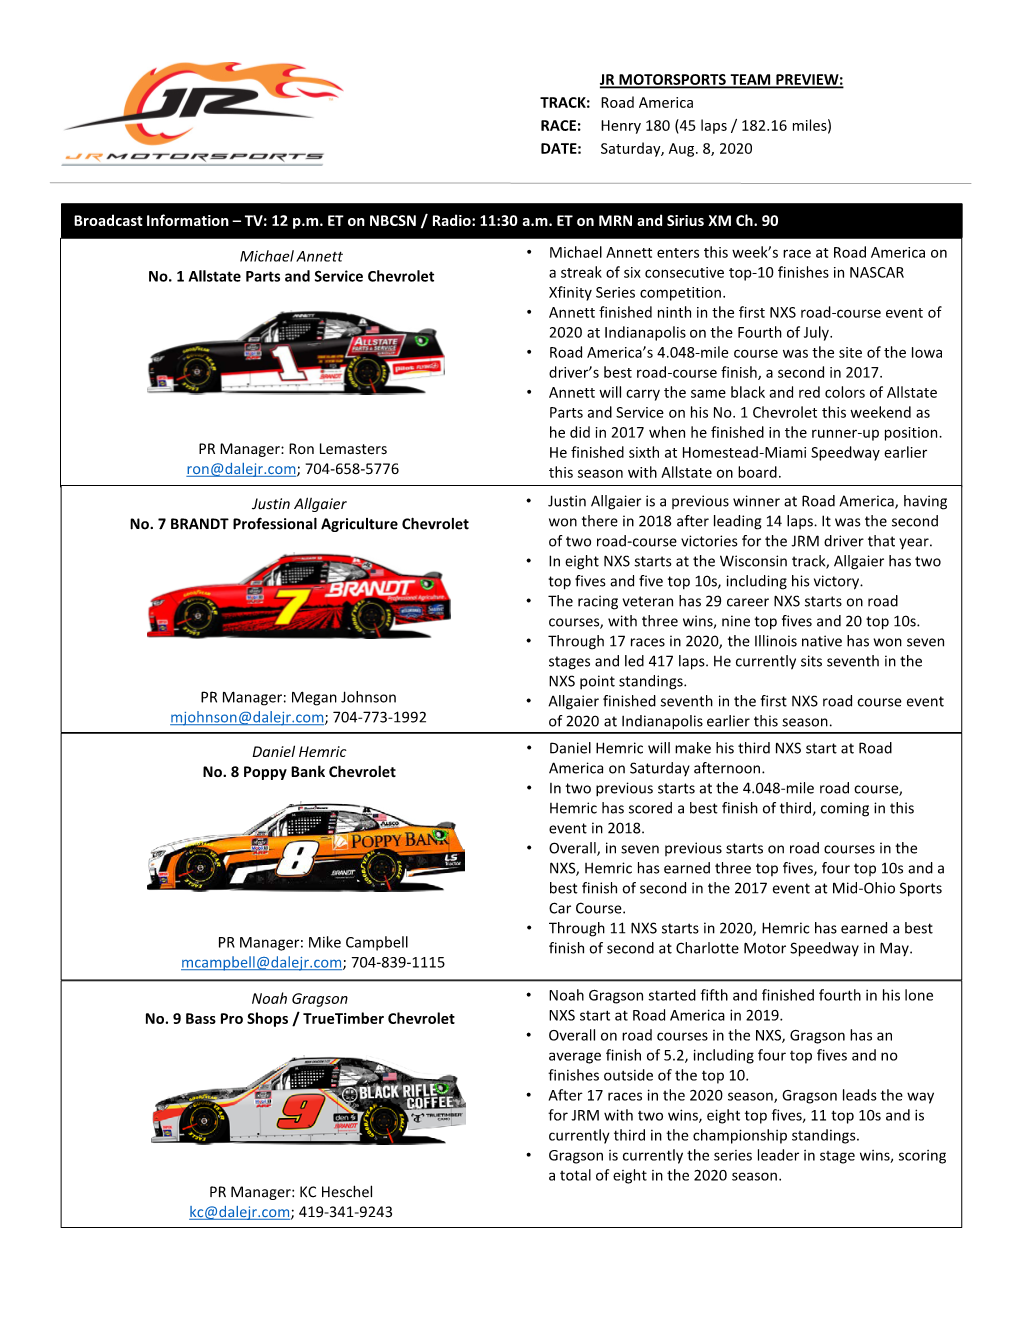 JR MOTORSPORTS TEAM PREVIEW: TRACK: Road America RACE: Henry 180 (45 Laps / 182.16 Miles) DATE: Saturday, Aug